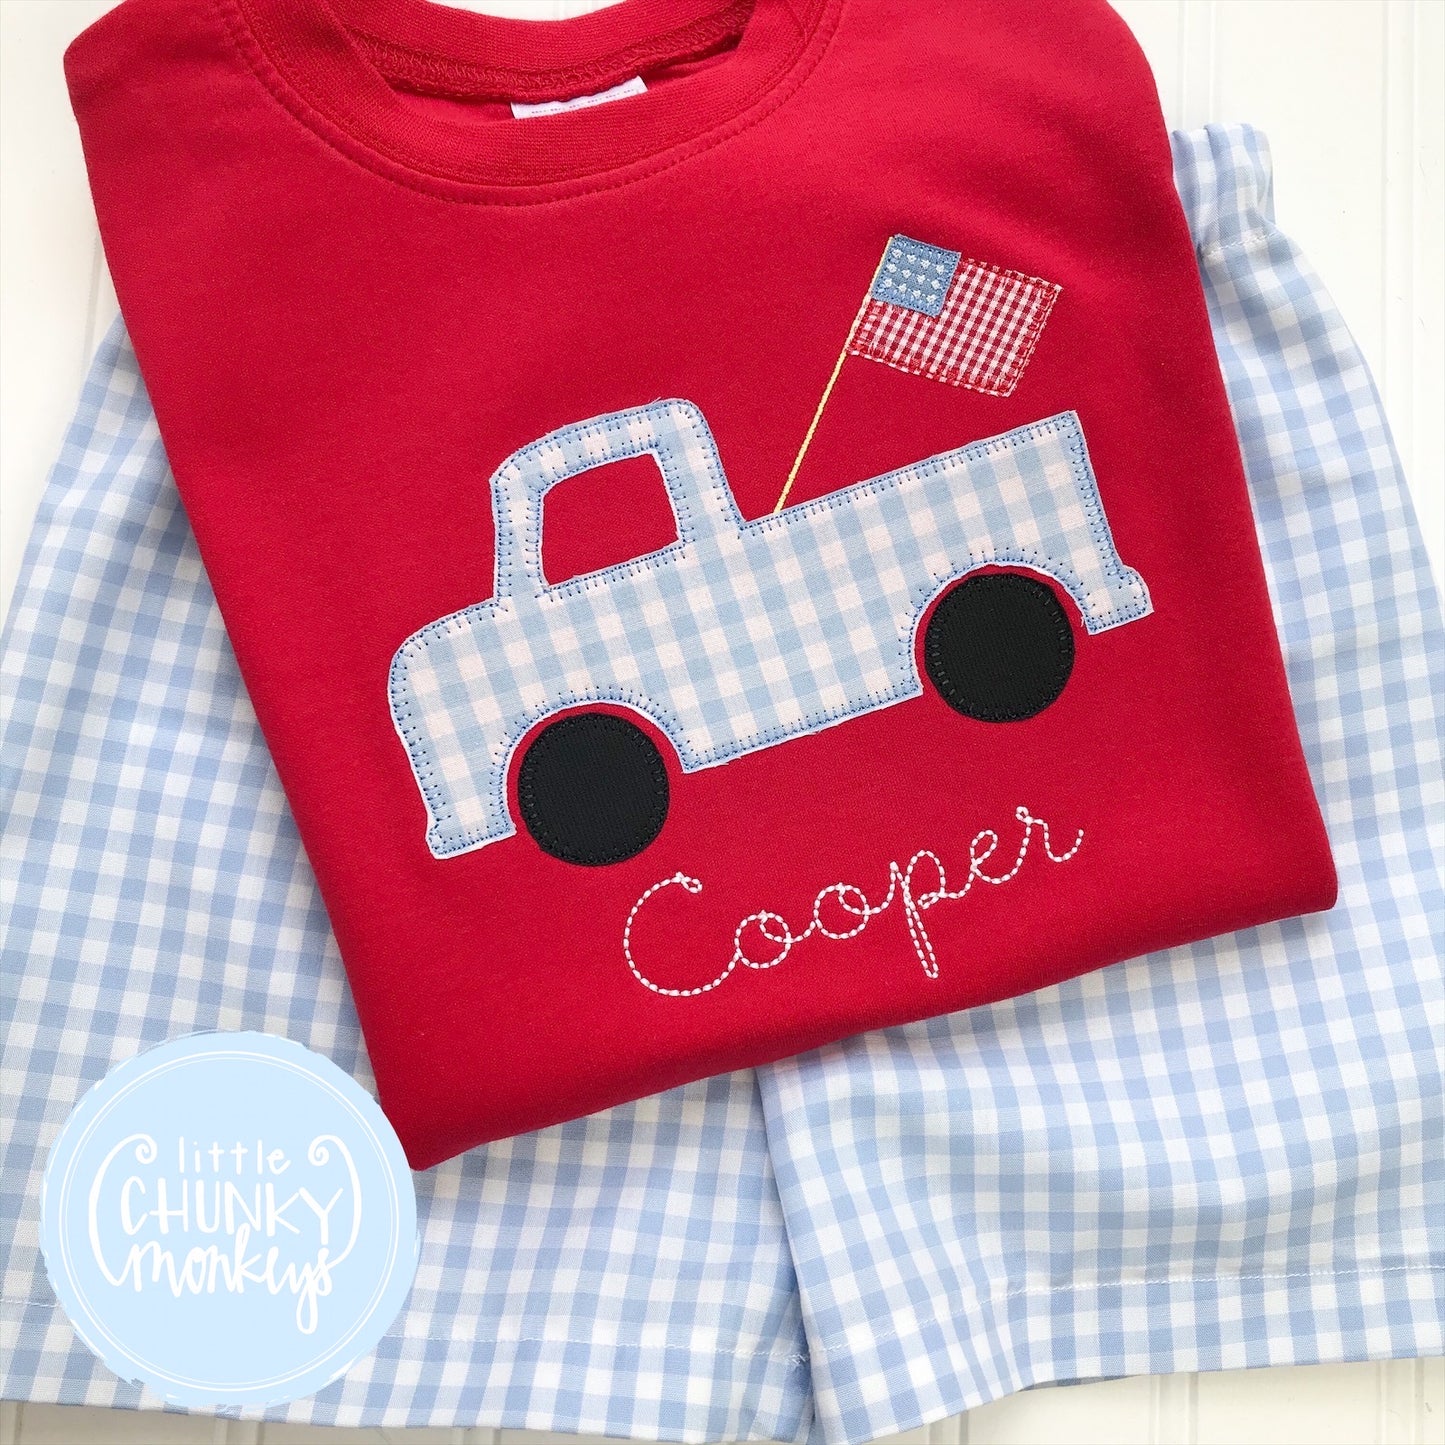 Boy Shirt - Applique patriotic truck with Vintage Stitch personalization on Red Shirt